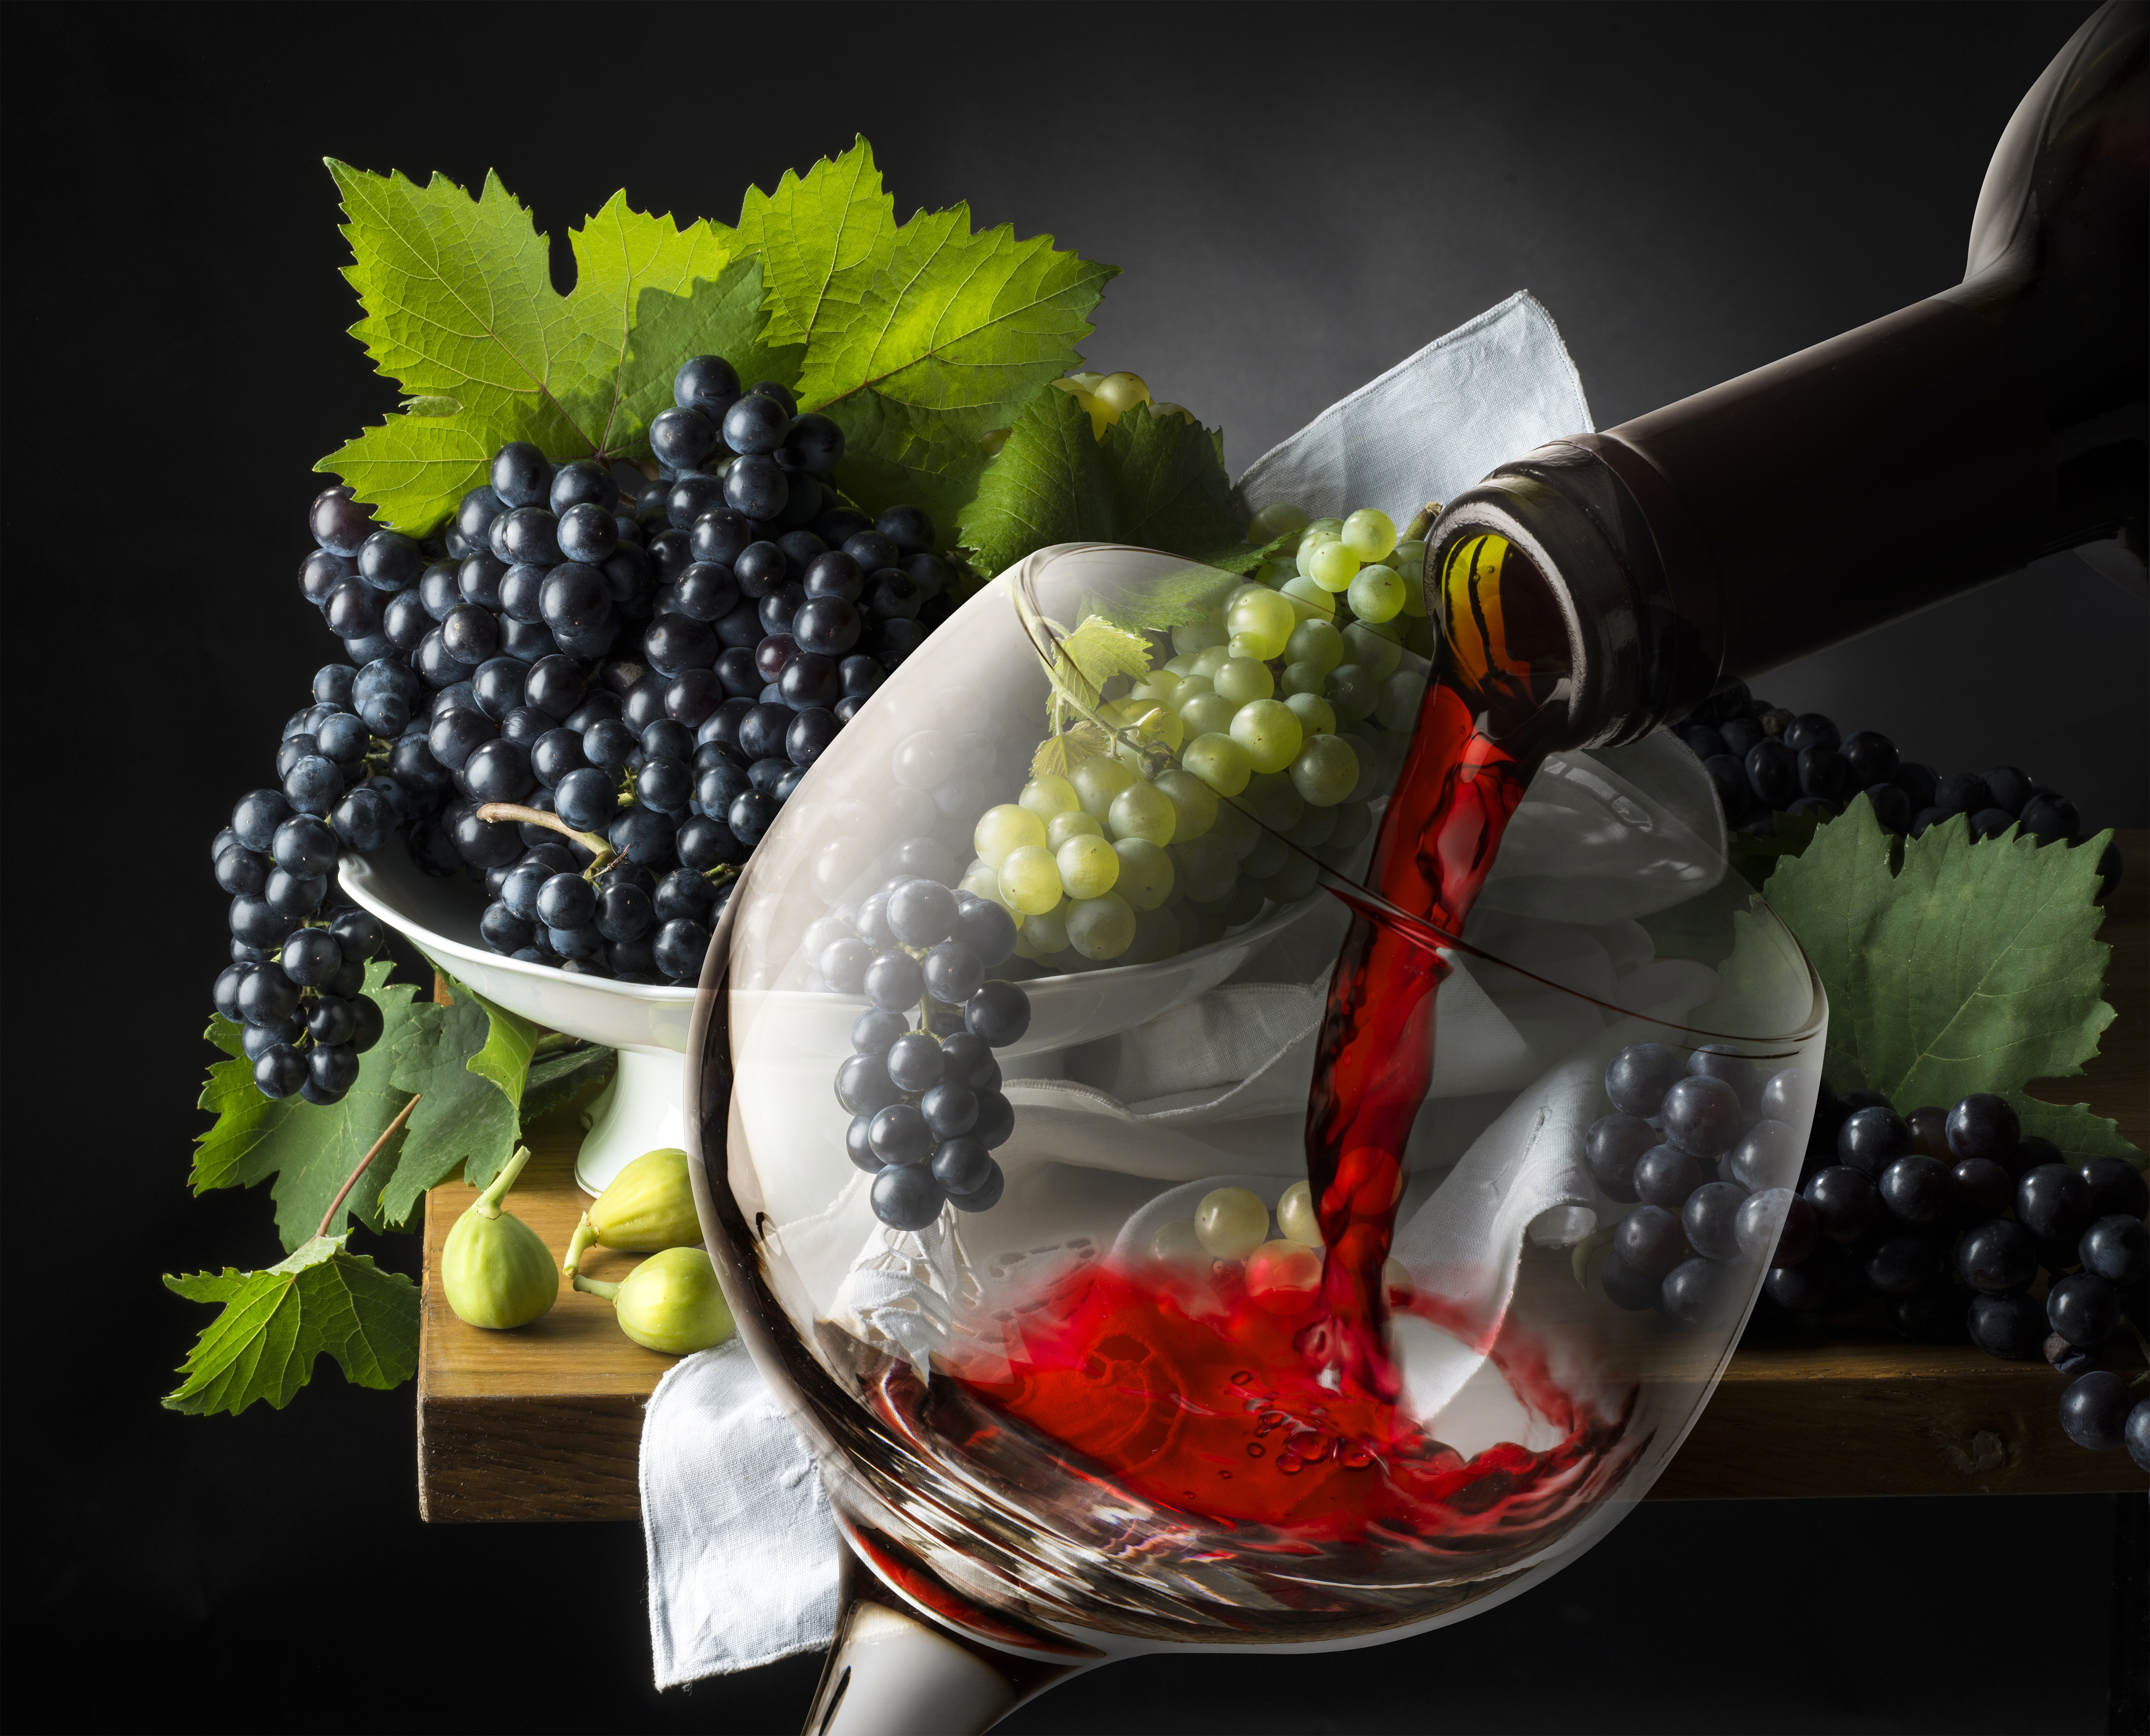 wine grapes background